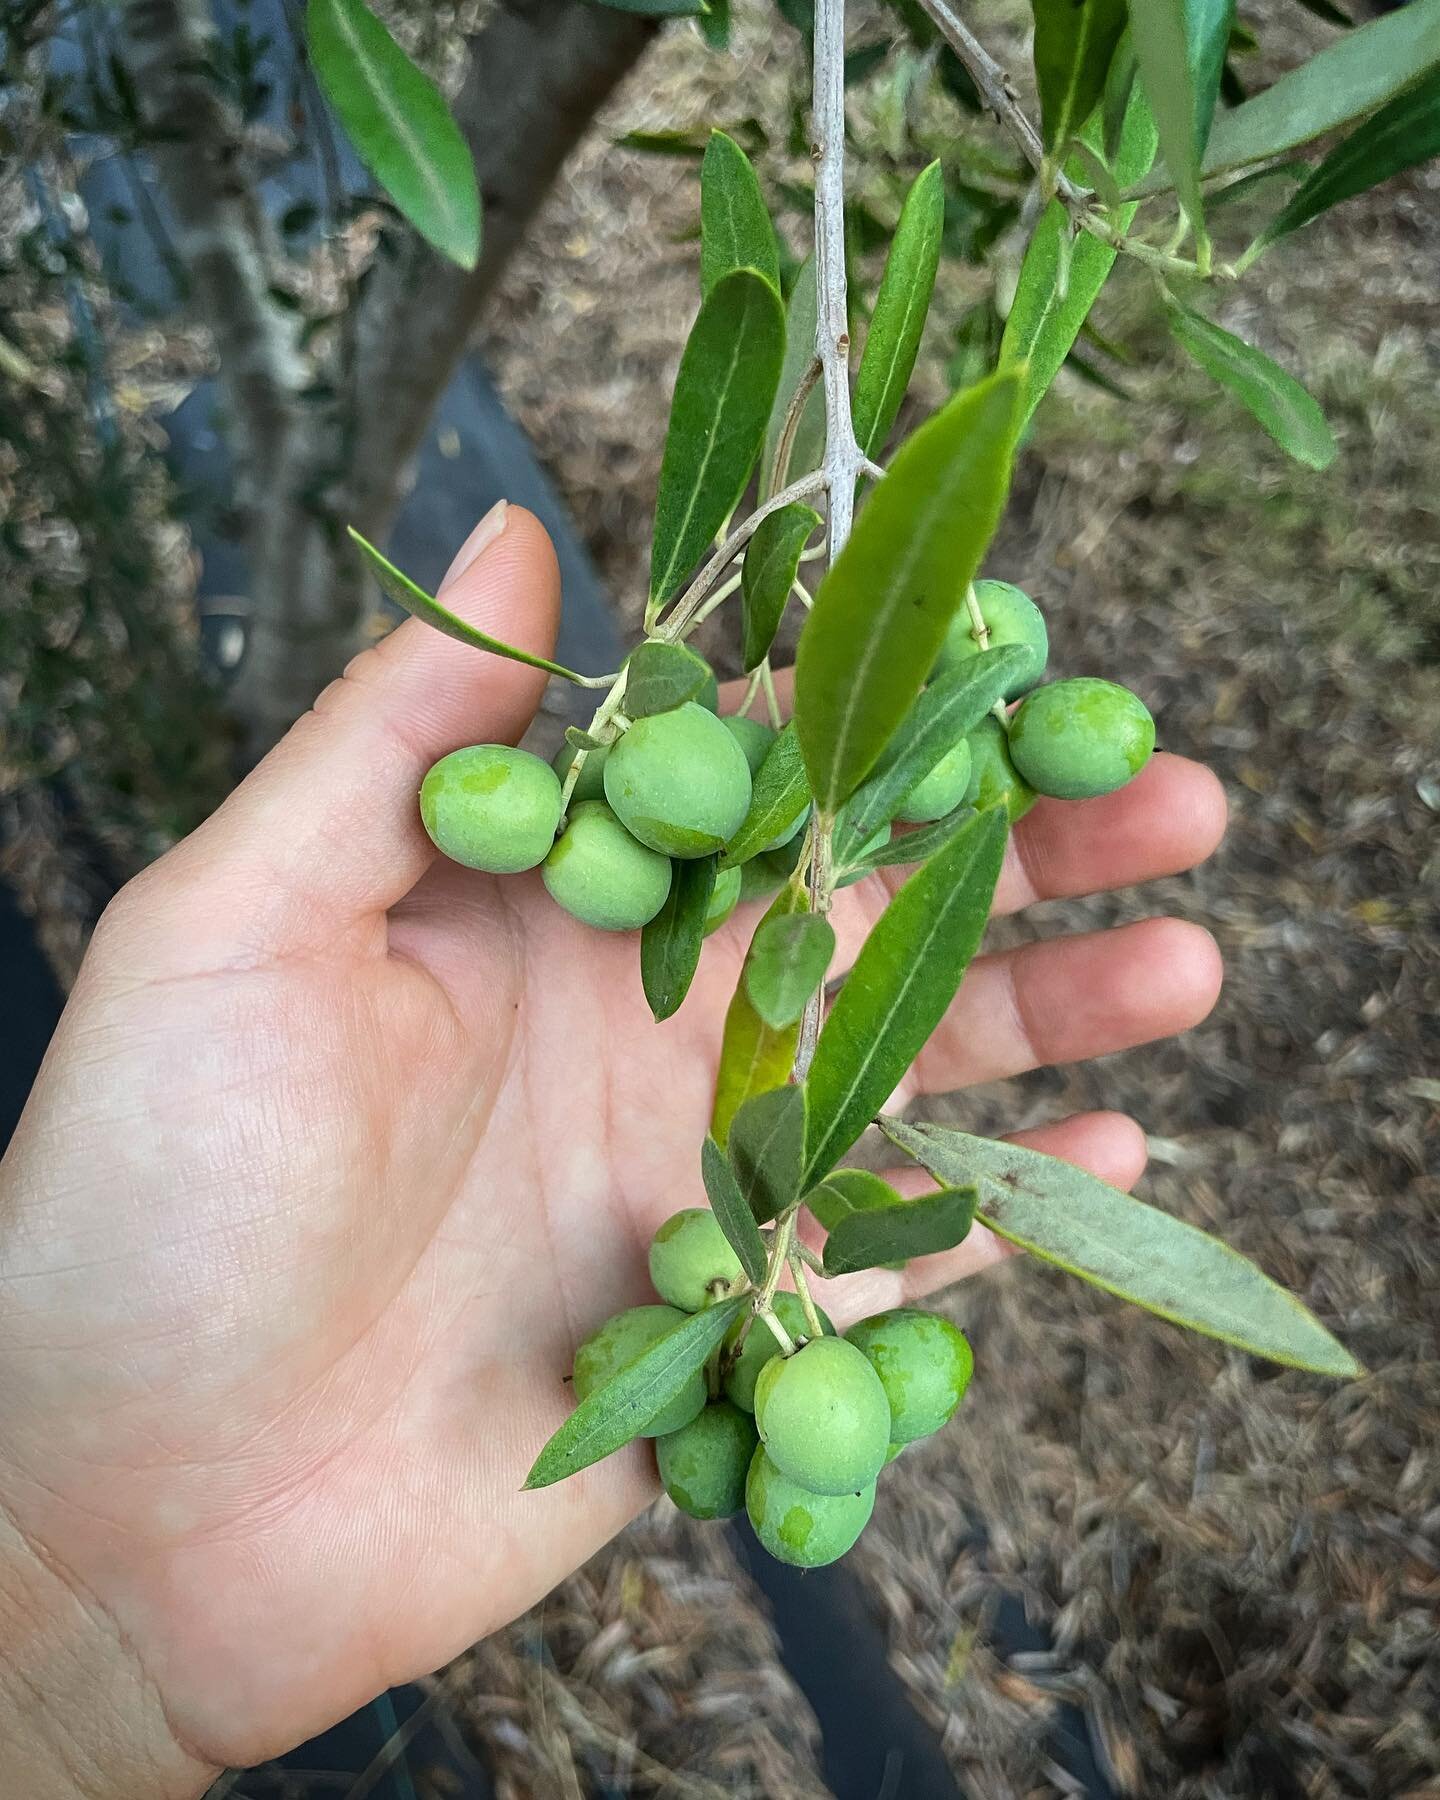 Trees are getting ready for the upcoming season!! Hang tight olives, we&rsquo;re ready in a couple months 😅🫒🫒🫒🫒

#olivesmaui #mauioliveoil #pueokeafarmsoliveoil #evoo #upcountrymaui #mauinokaoi #olivesnokaoi #gettingreadyforseason